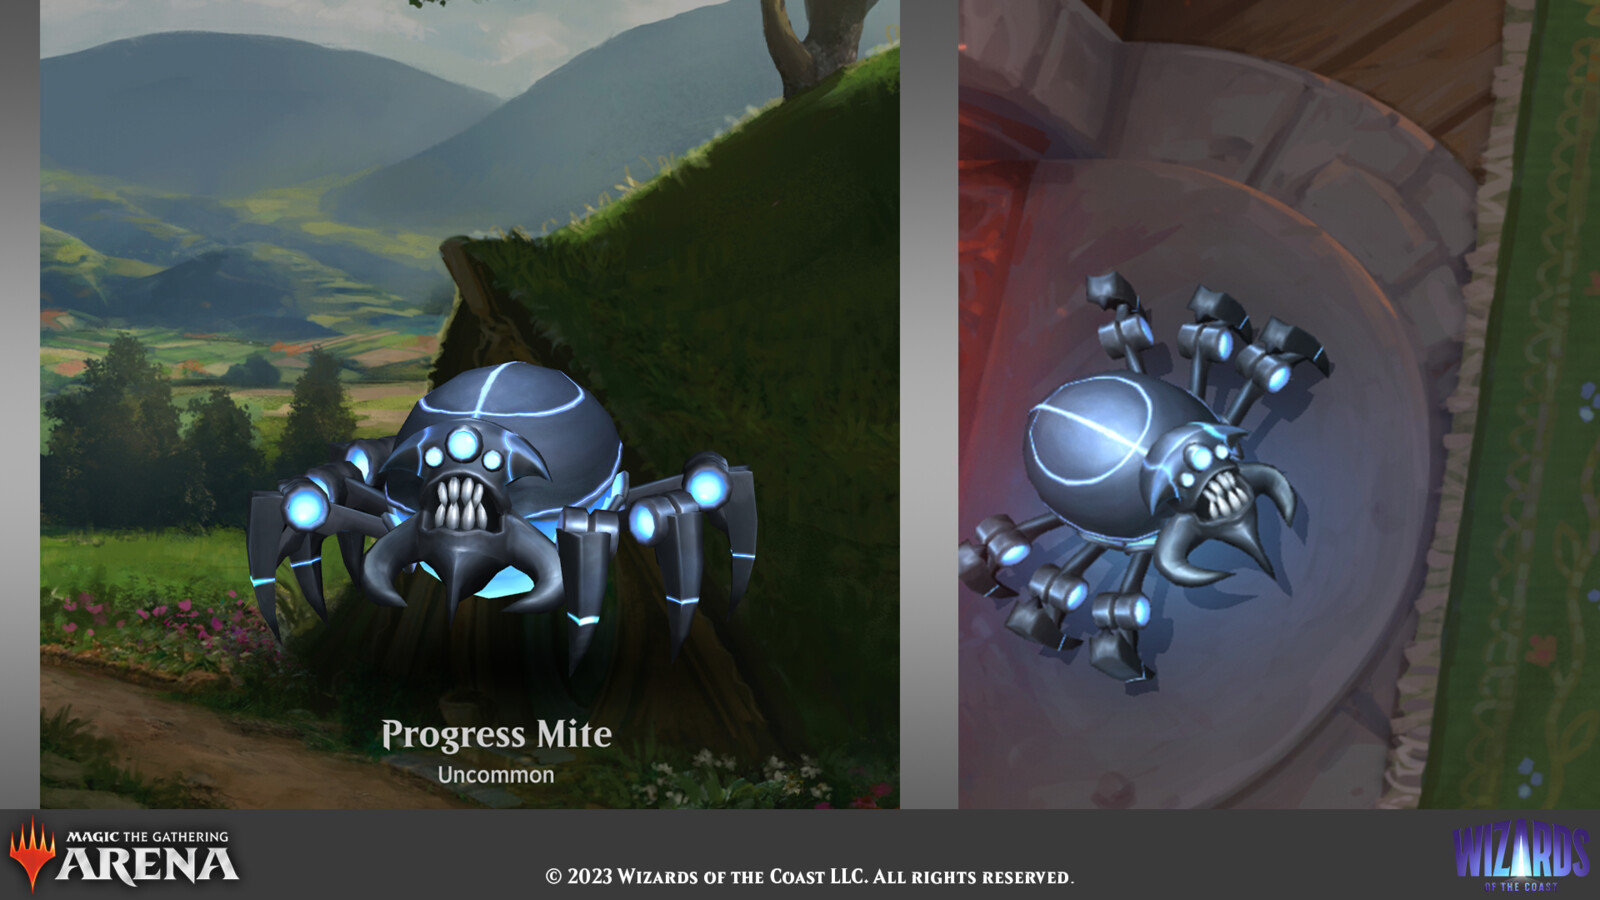 Select pet and game views for the Progress Mite